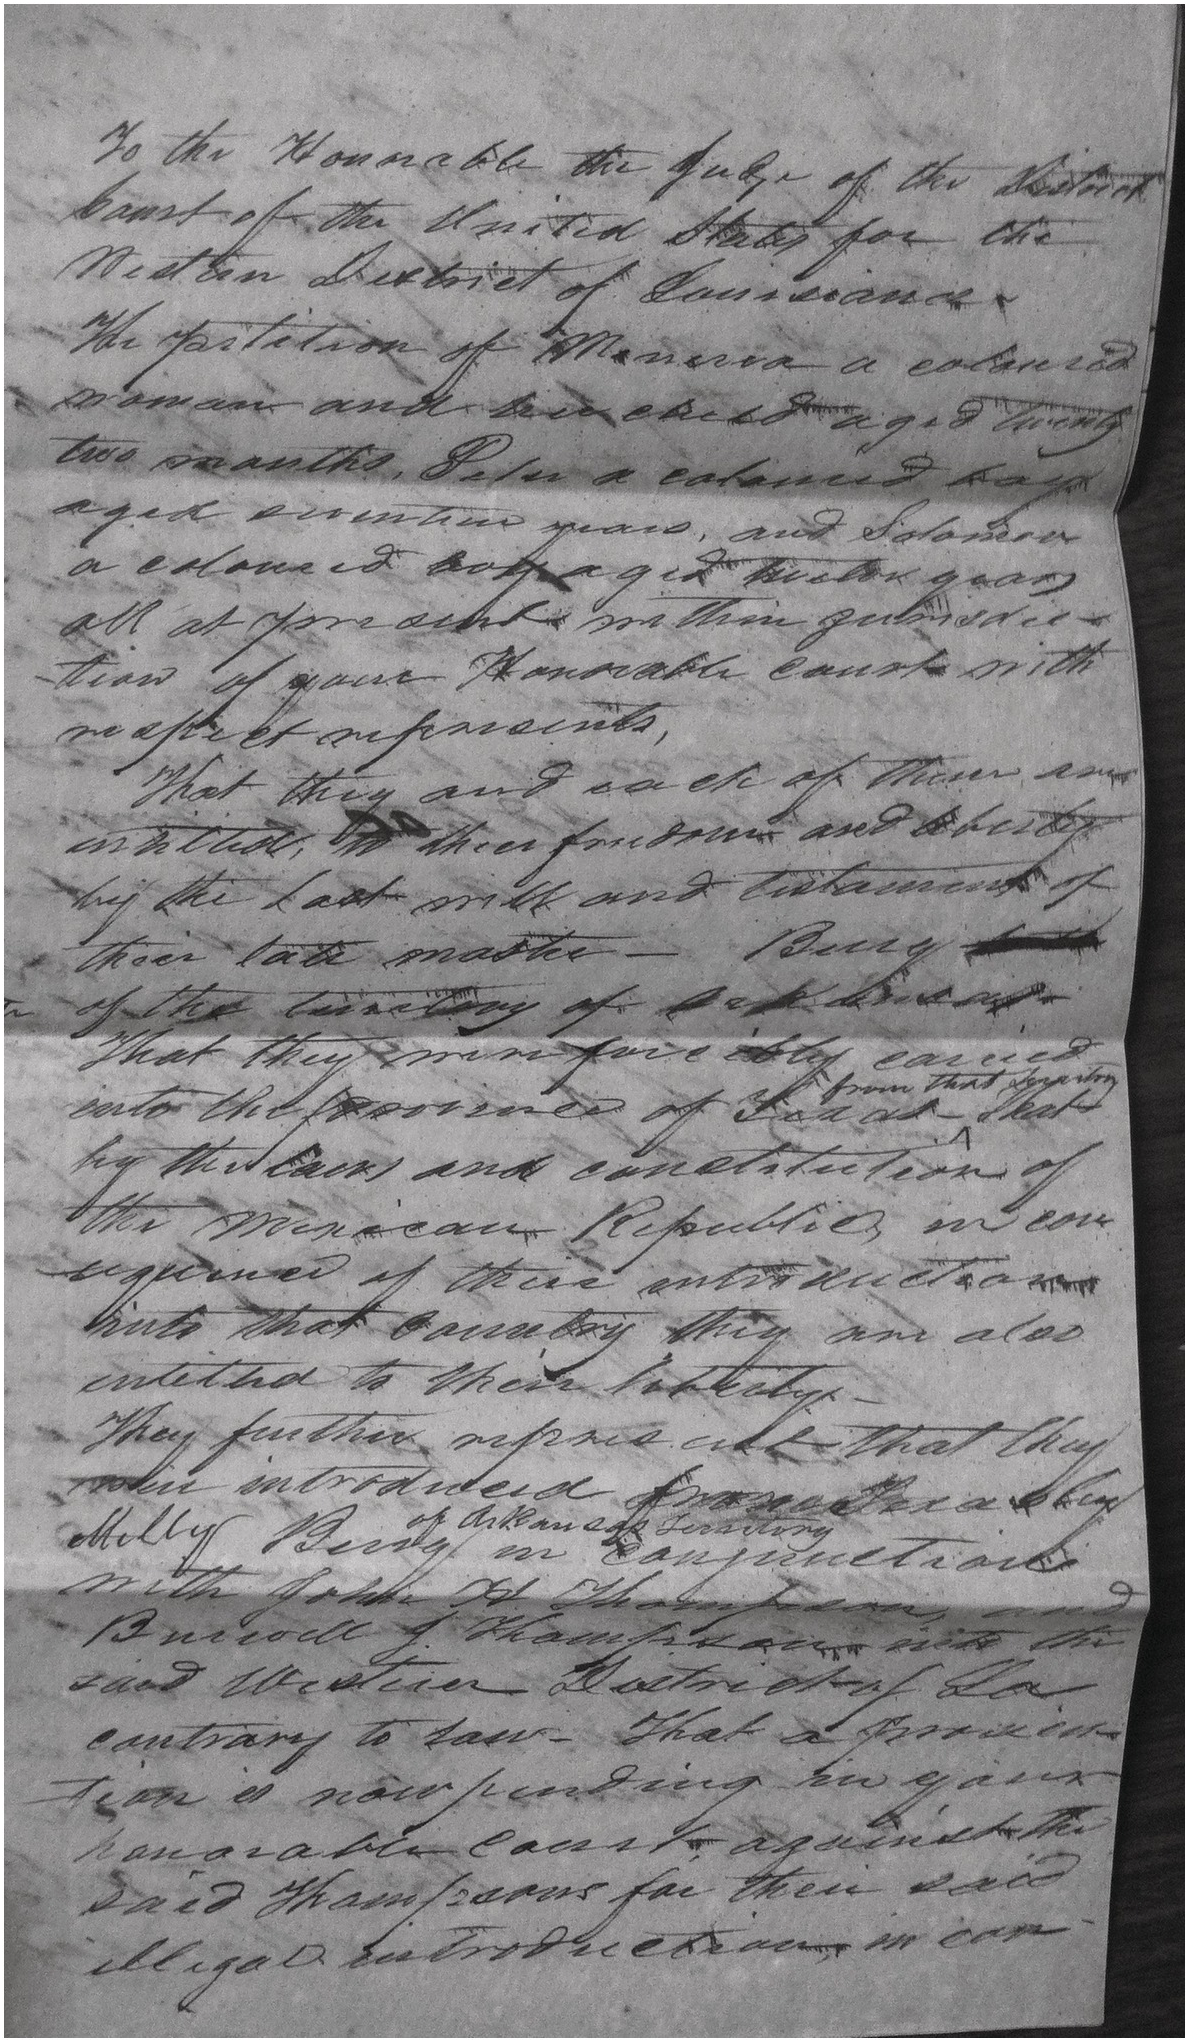 Texas Declaration of Independence, 1836  Gilder Lehrman Institute of  American History